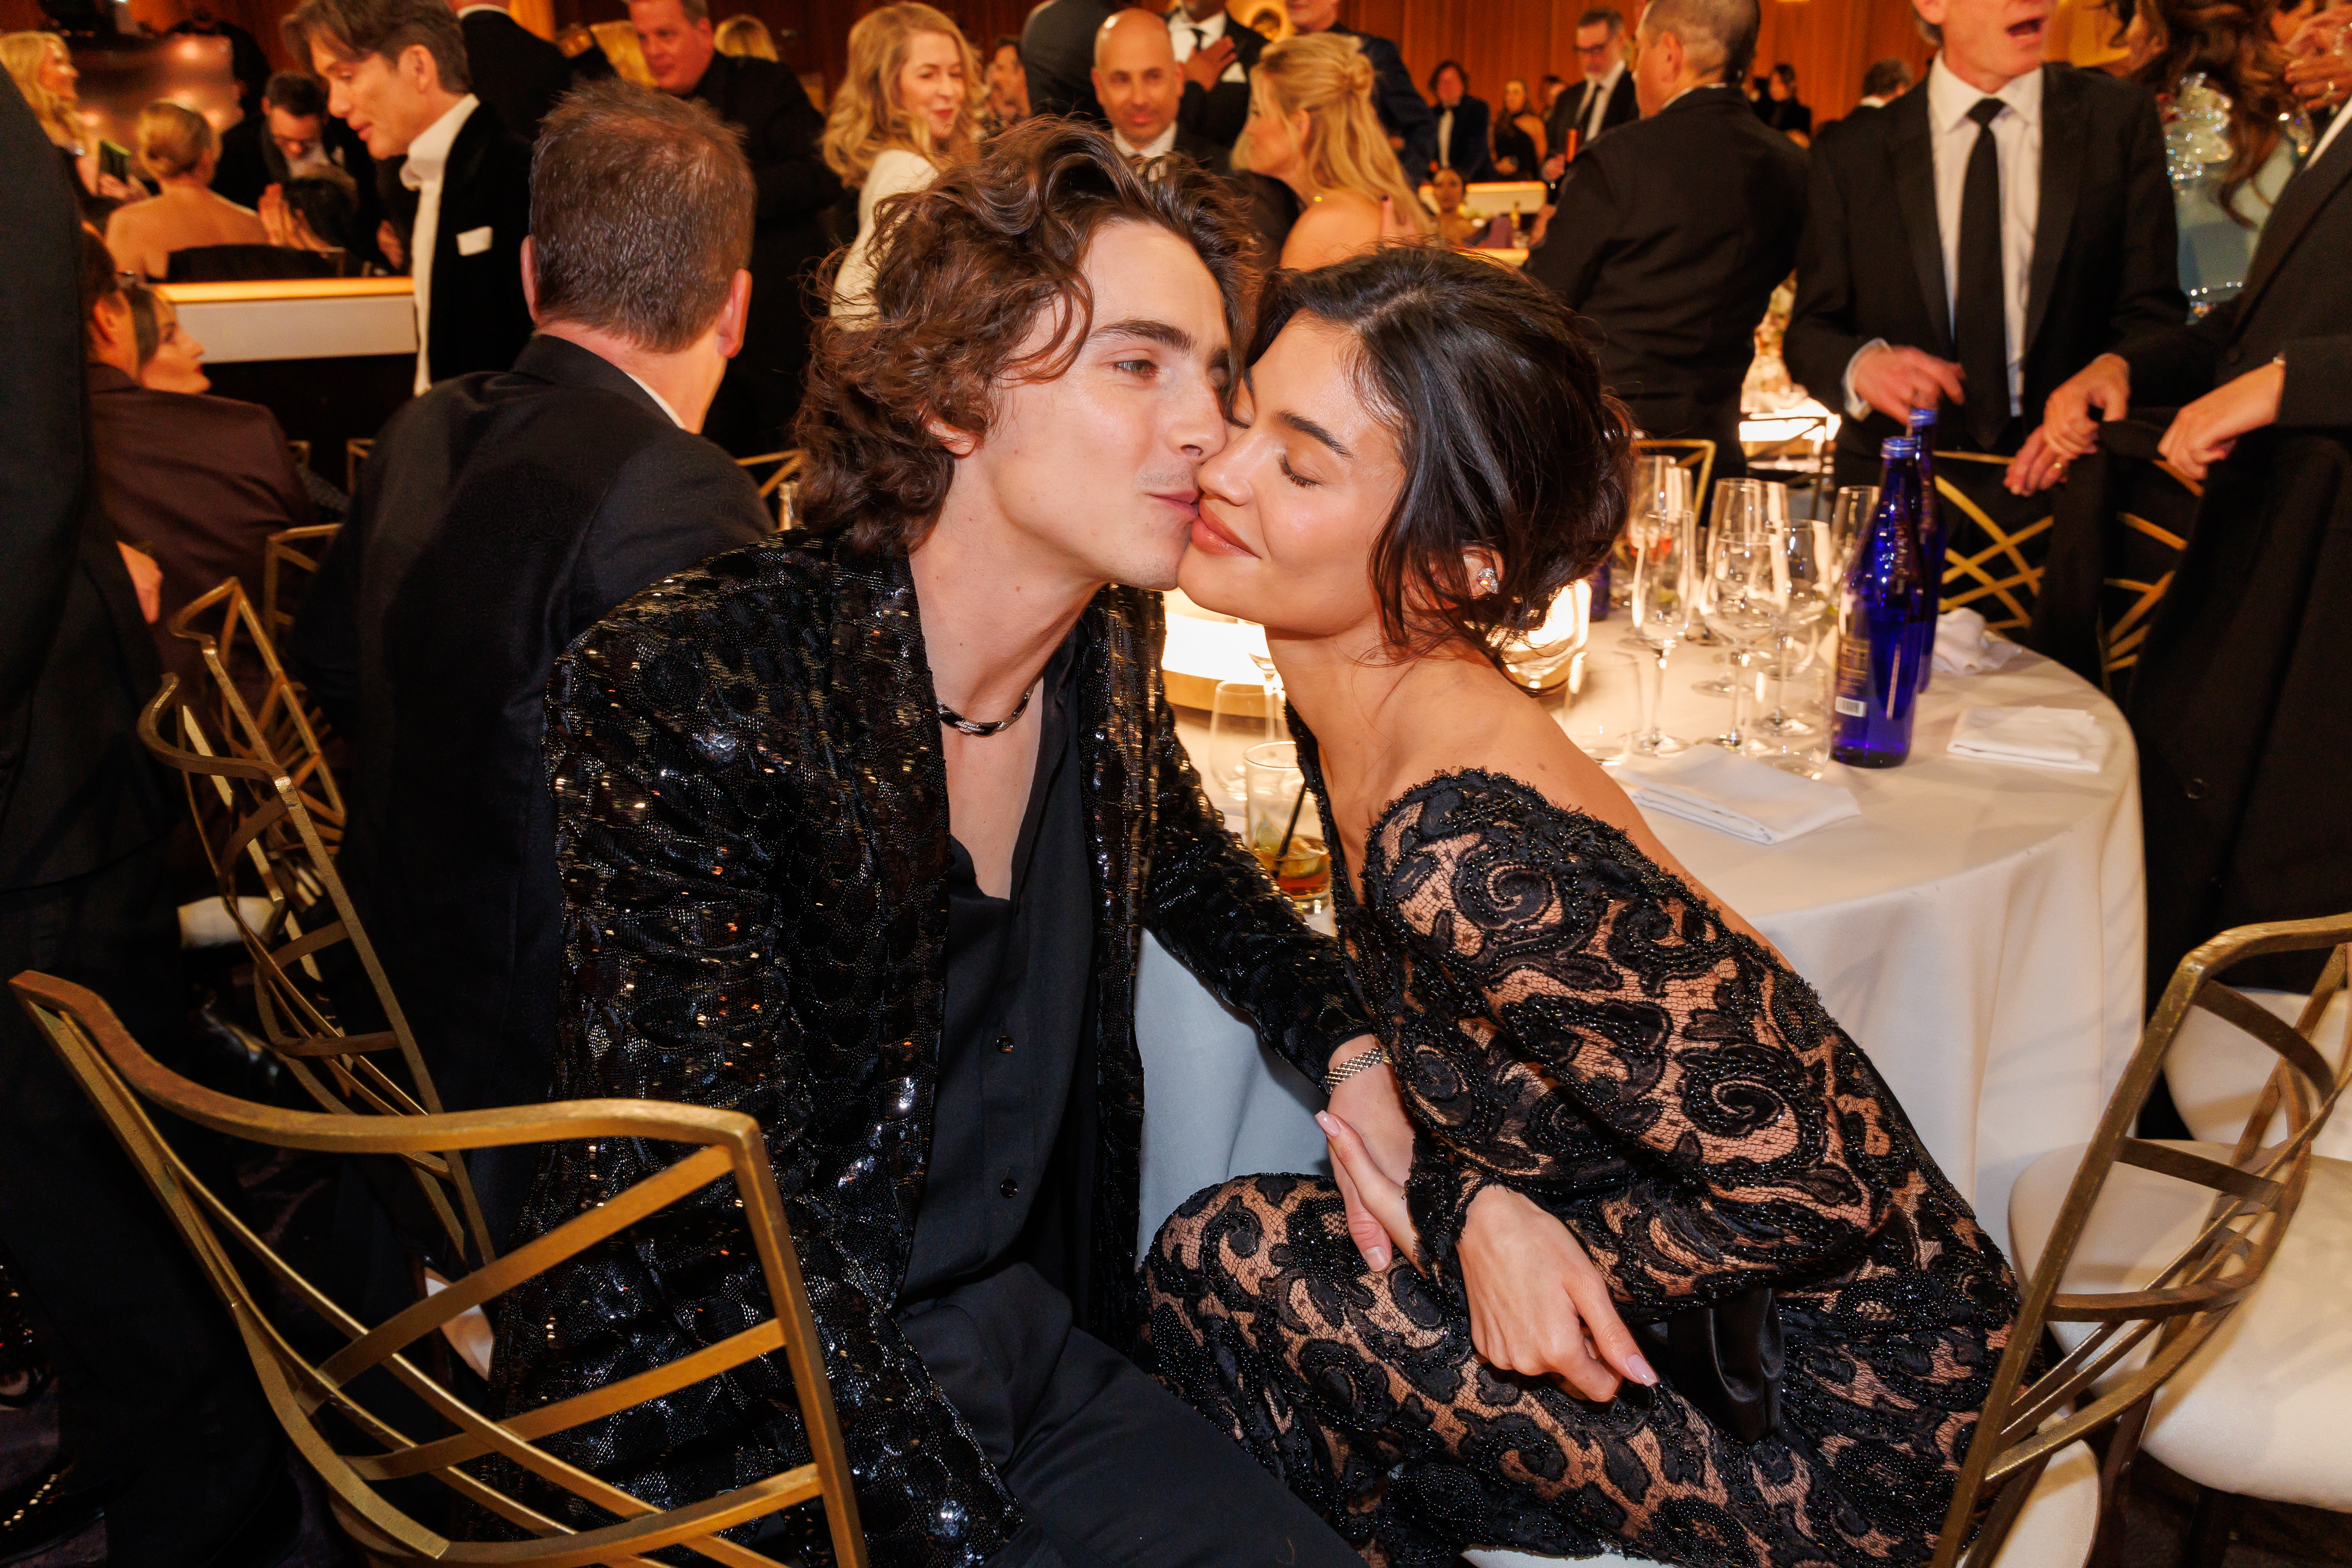 Kylie and Timothée began dating in March 2023 but kept their relationship secret for the first few months